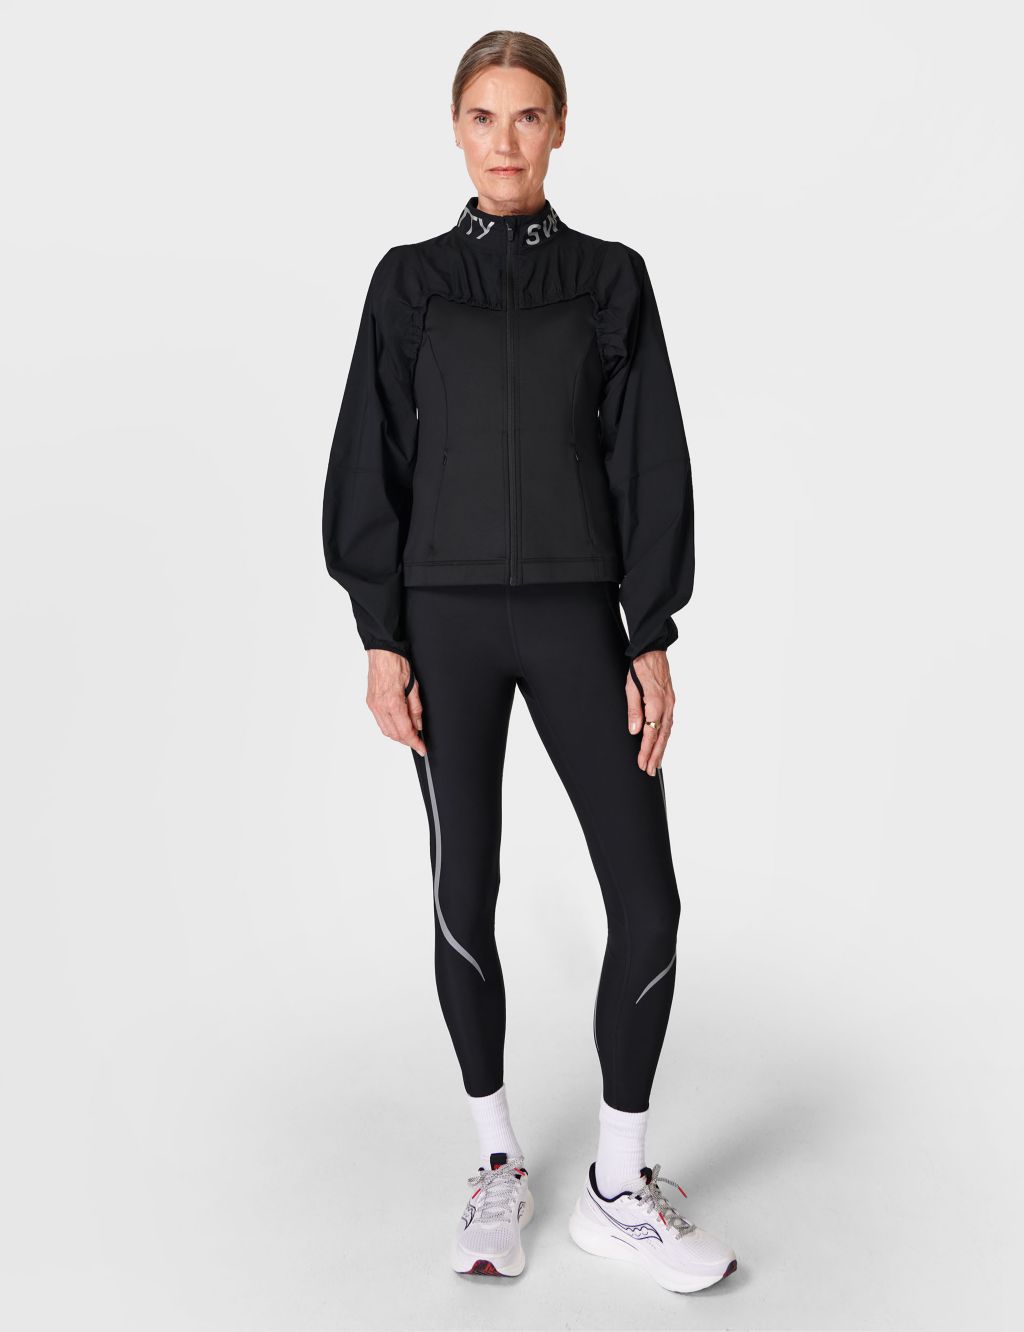 Therma Boost Lightweight Running Jacket image 2